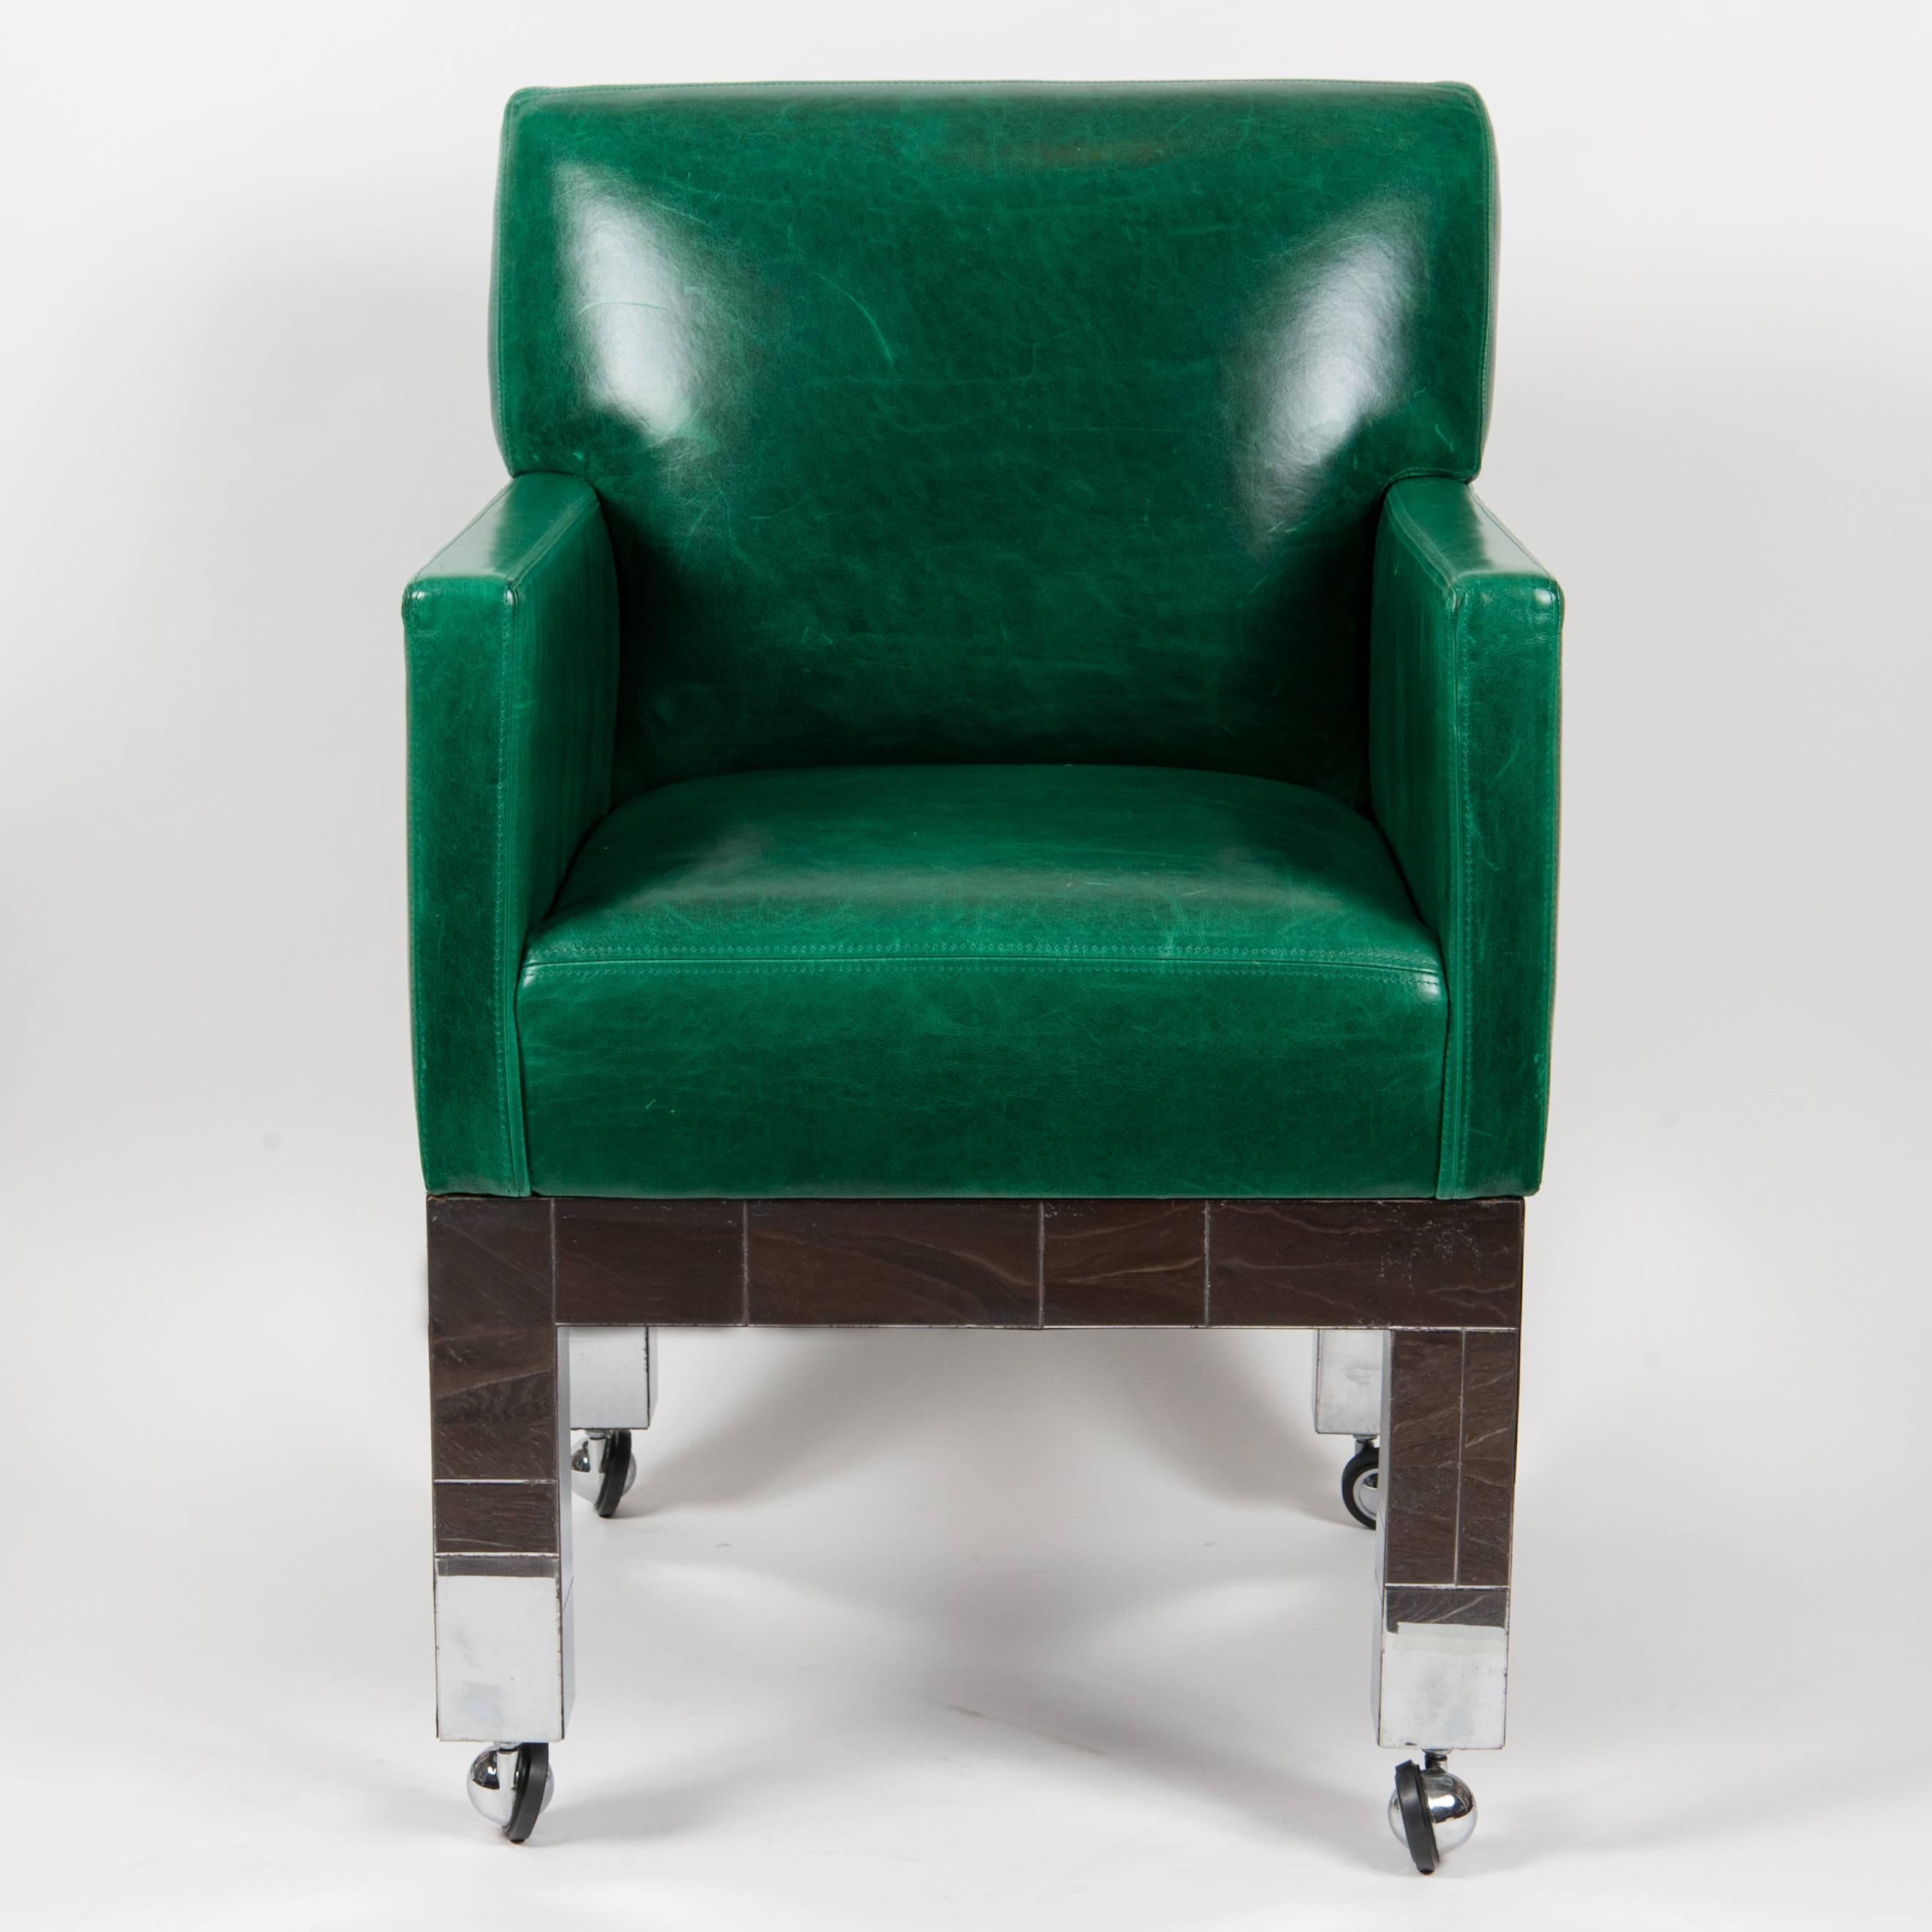 Pair of cityscape armchairs by Paul Evans in green leather and chrome base with rollers.